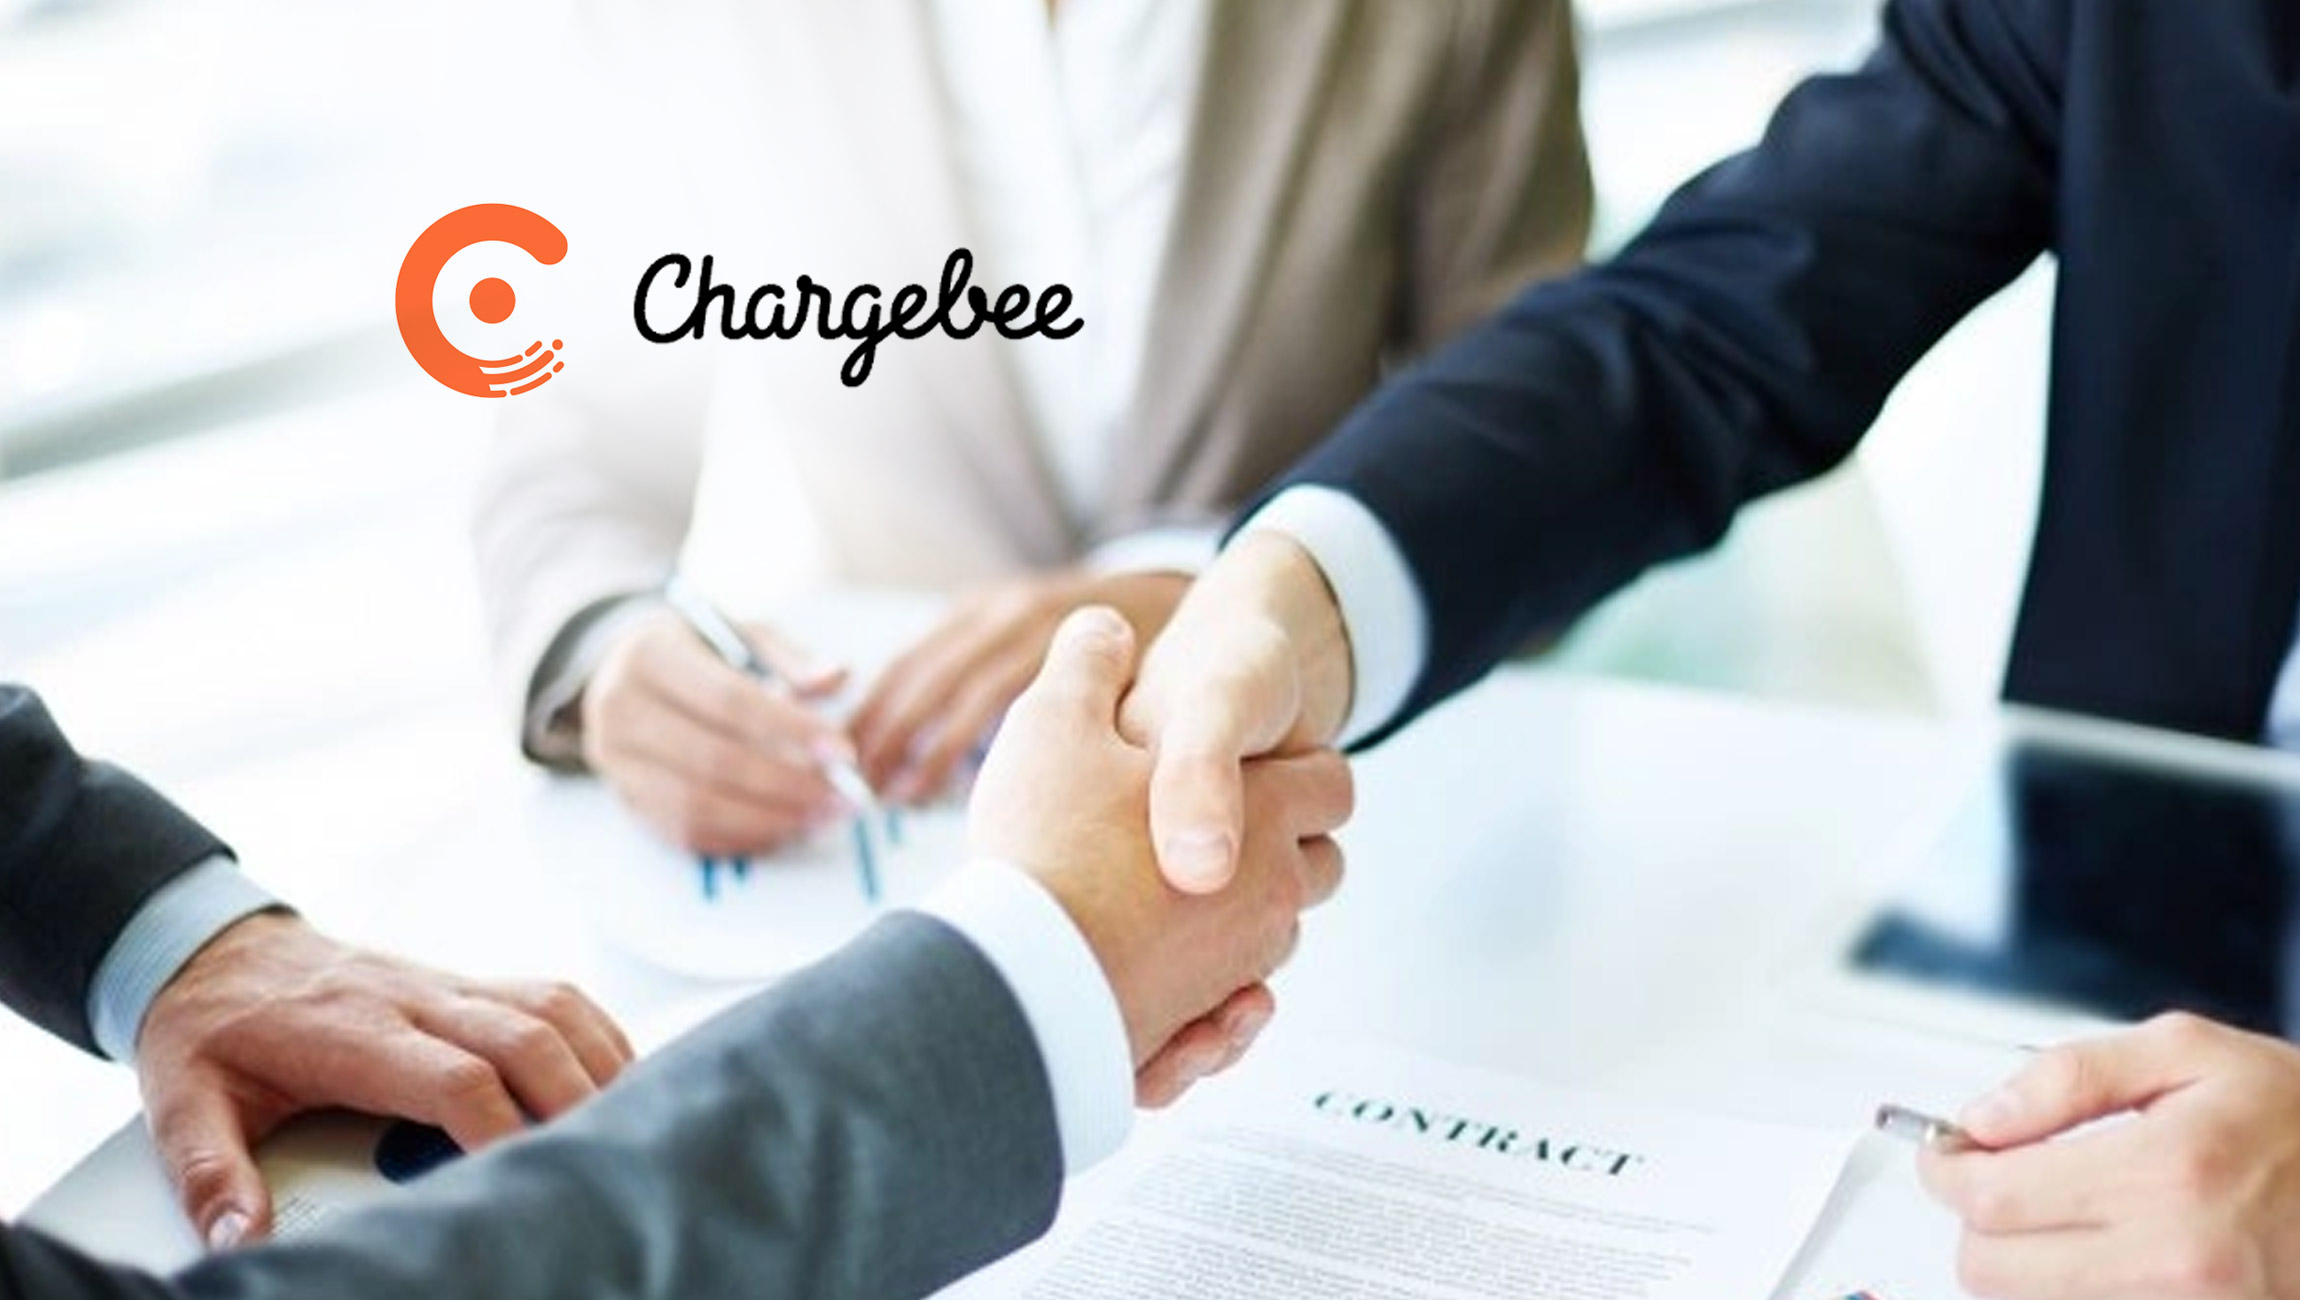 Chargebee Acquires Numberz, Launches Receivables to Help Subscription Businesses Get Paid Faster